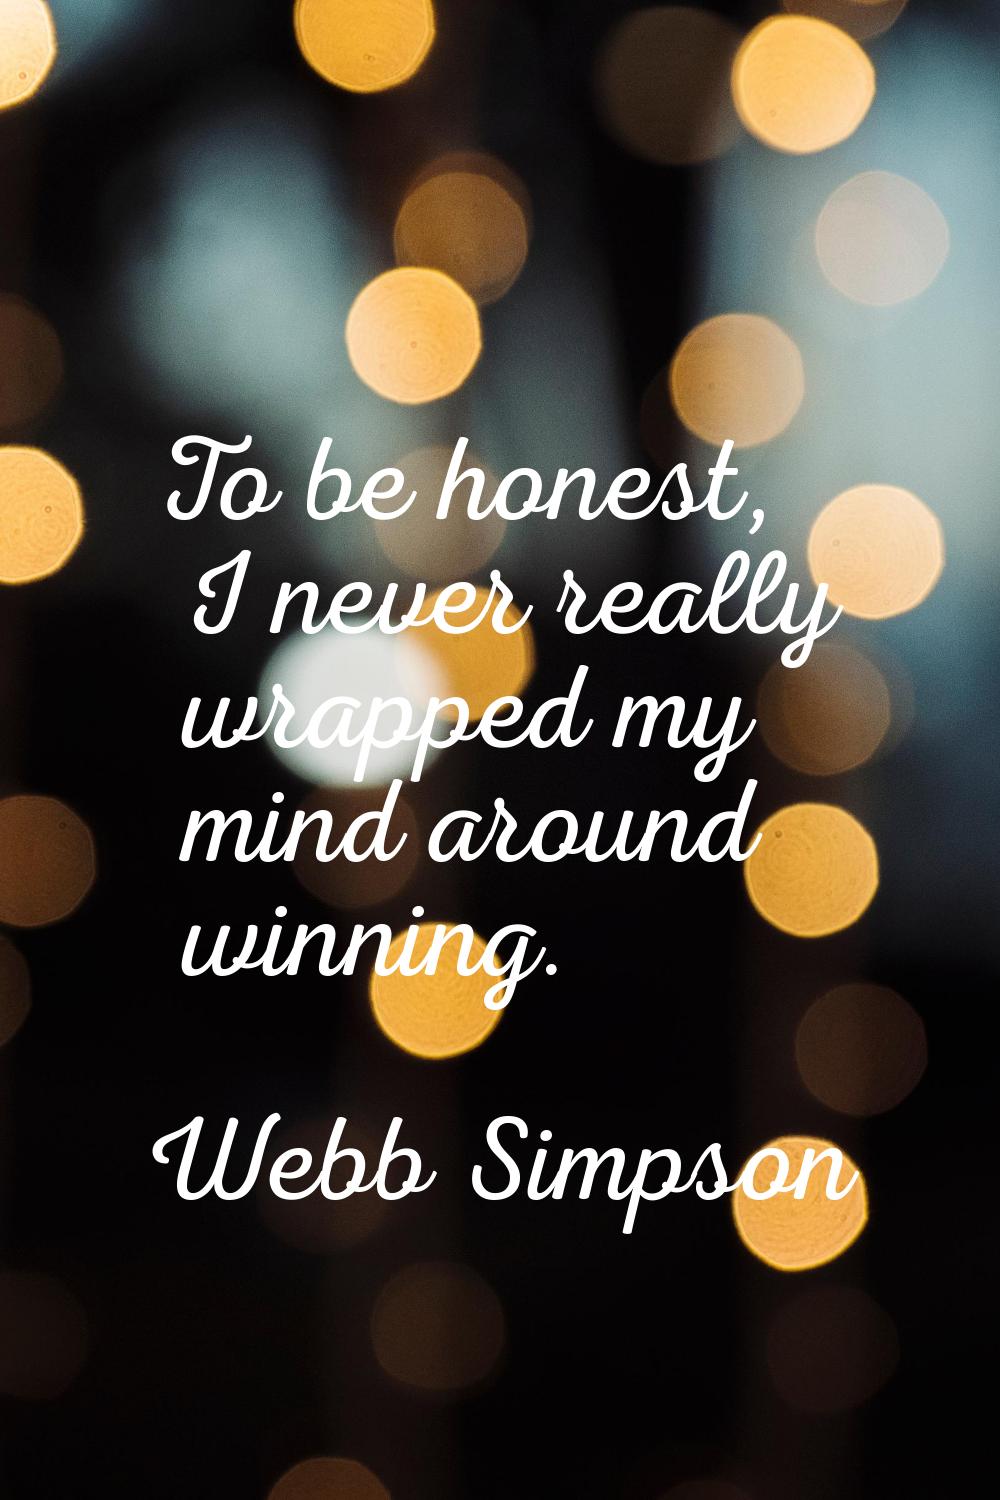 To be honest, I never really wrapped my mind around winning.